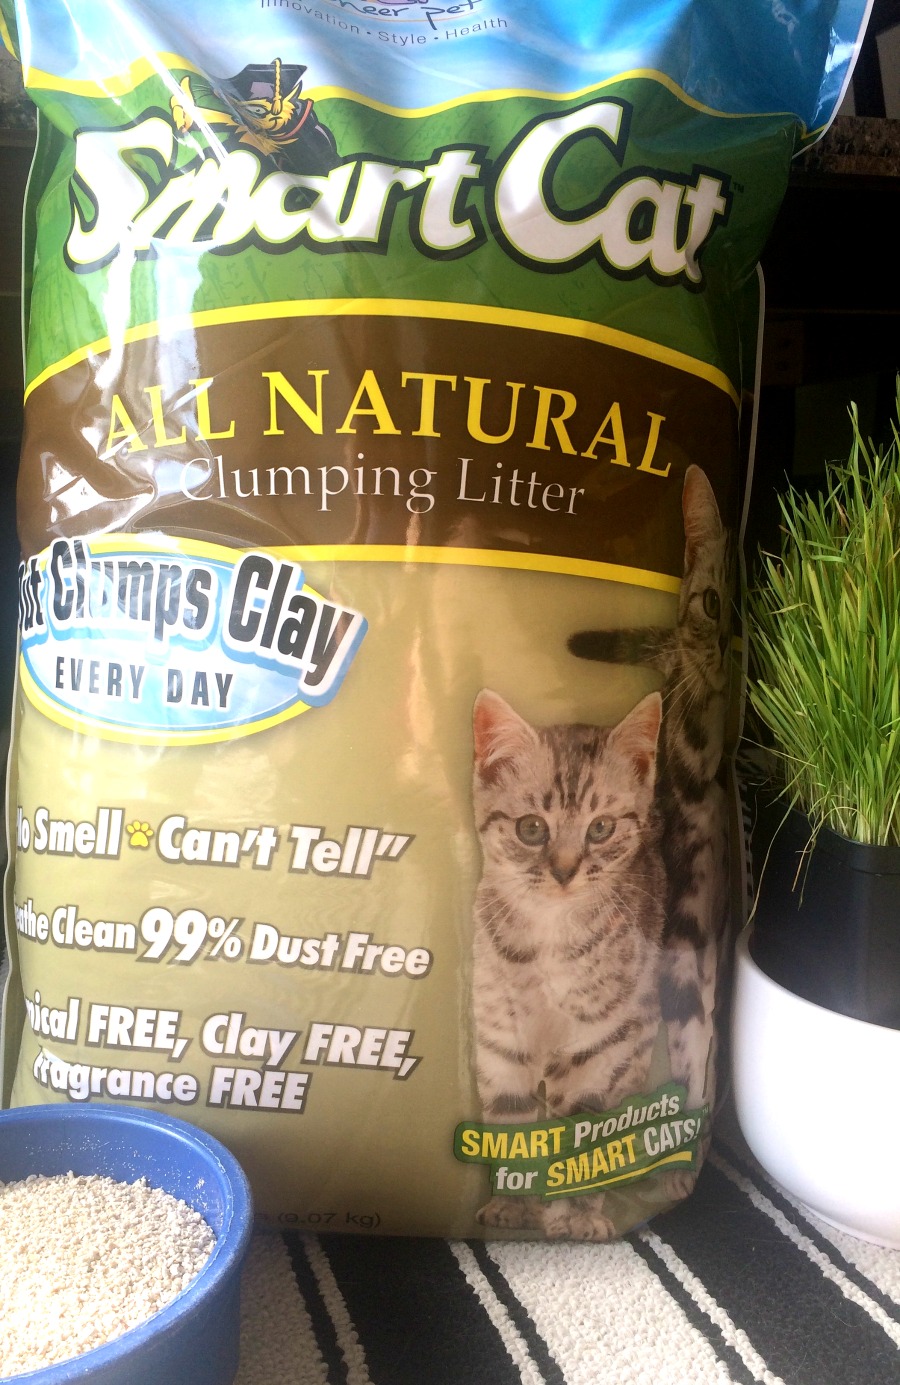 Looking for an all natural litter that truly makes cleaning the litter box easy? See why we have fallen in love with SmartCat All Natural Litter here!